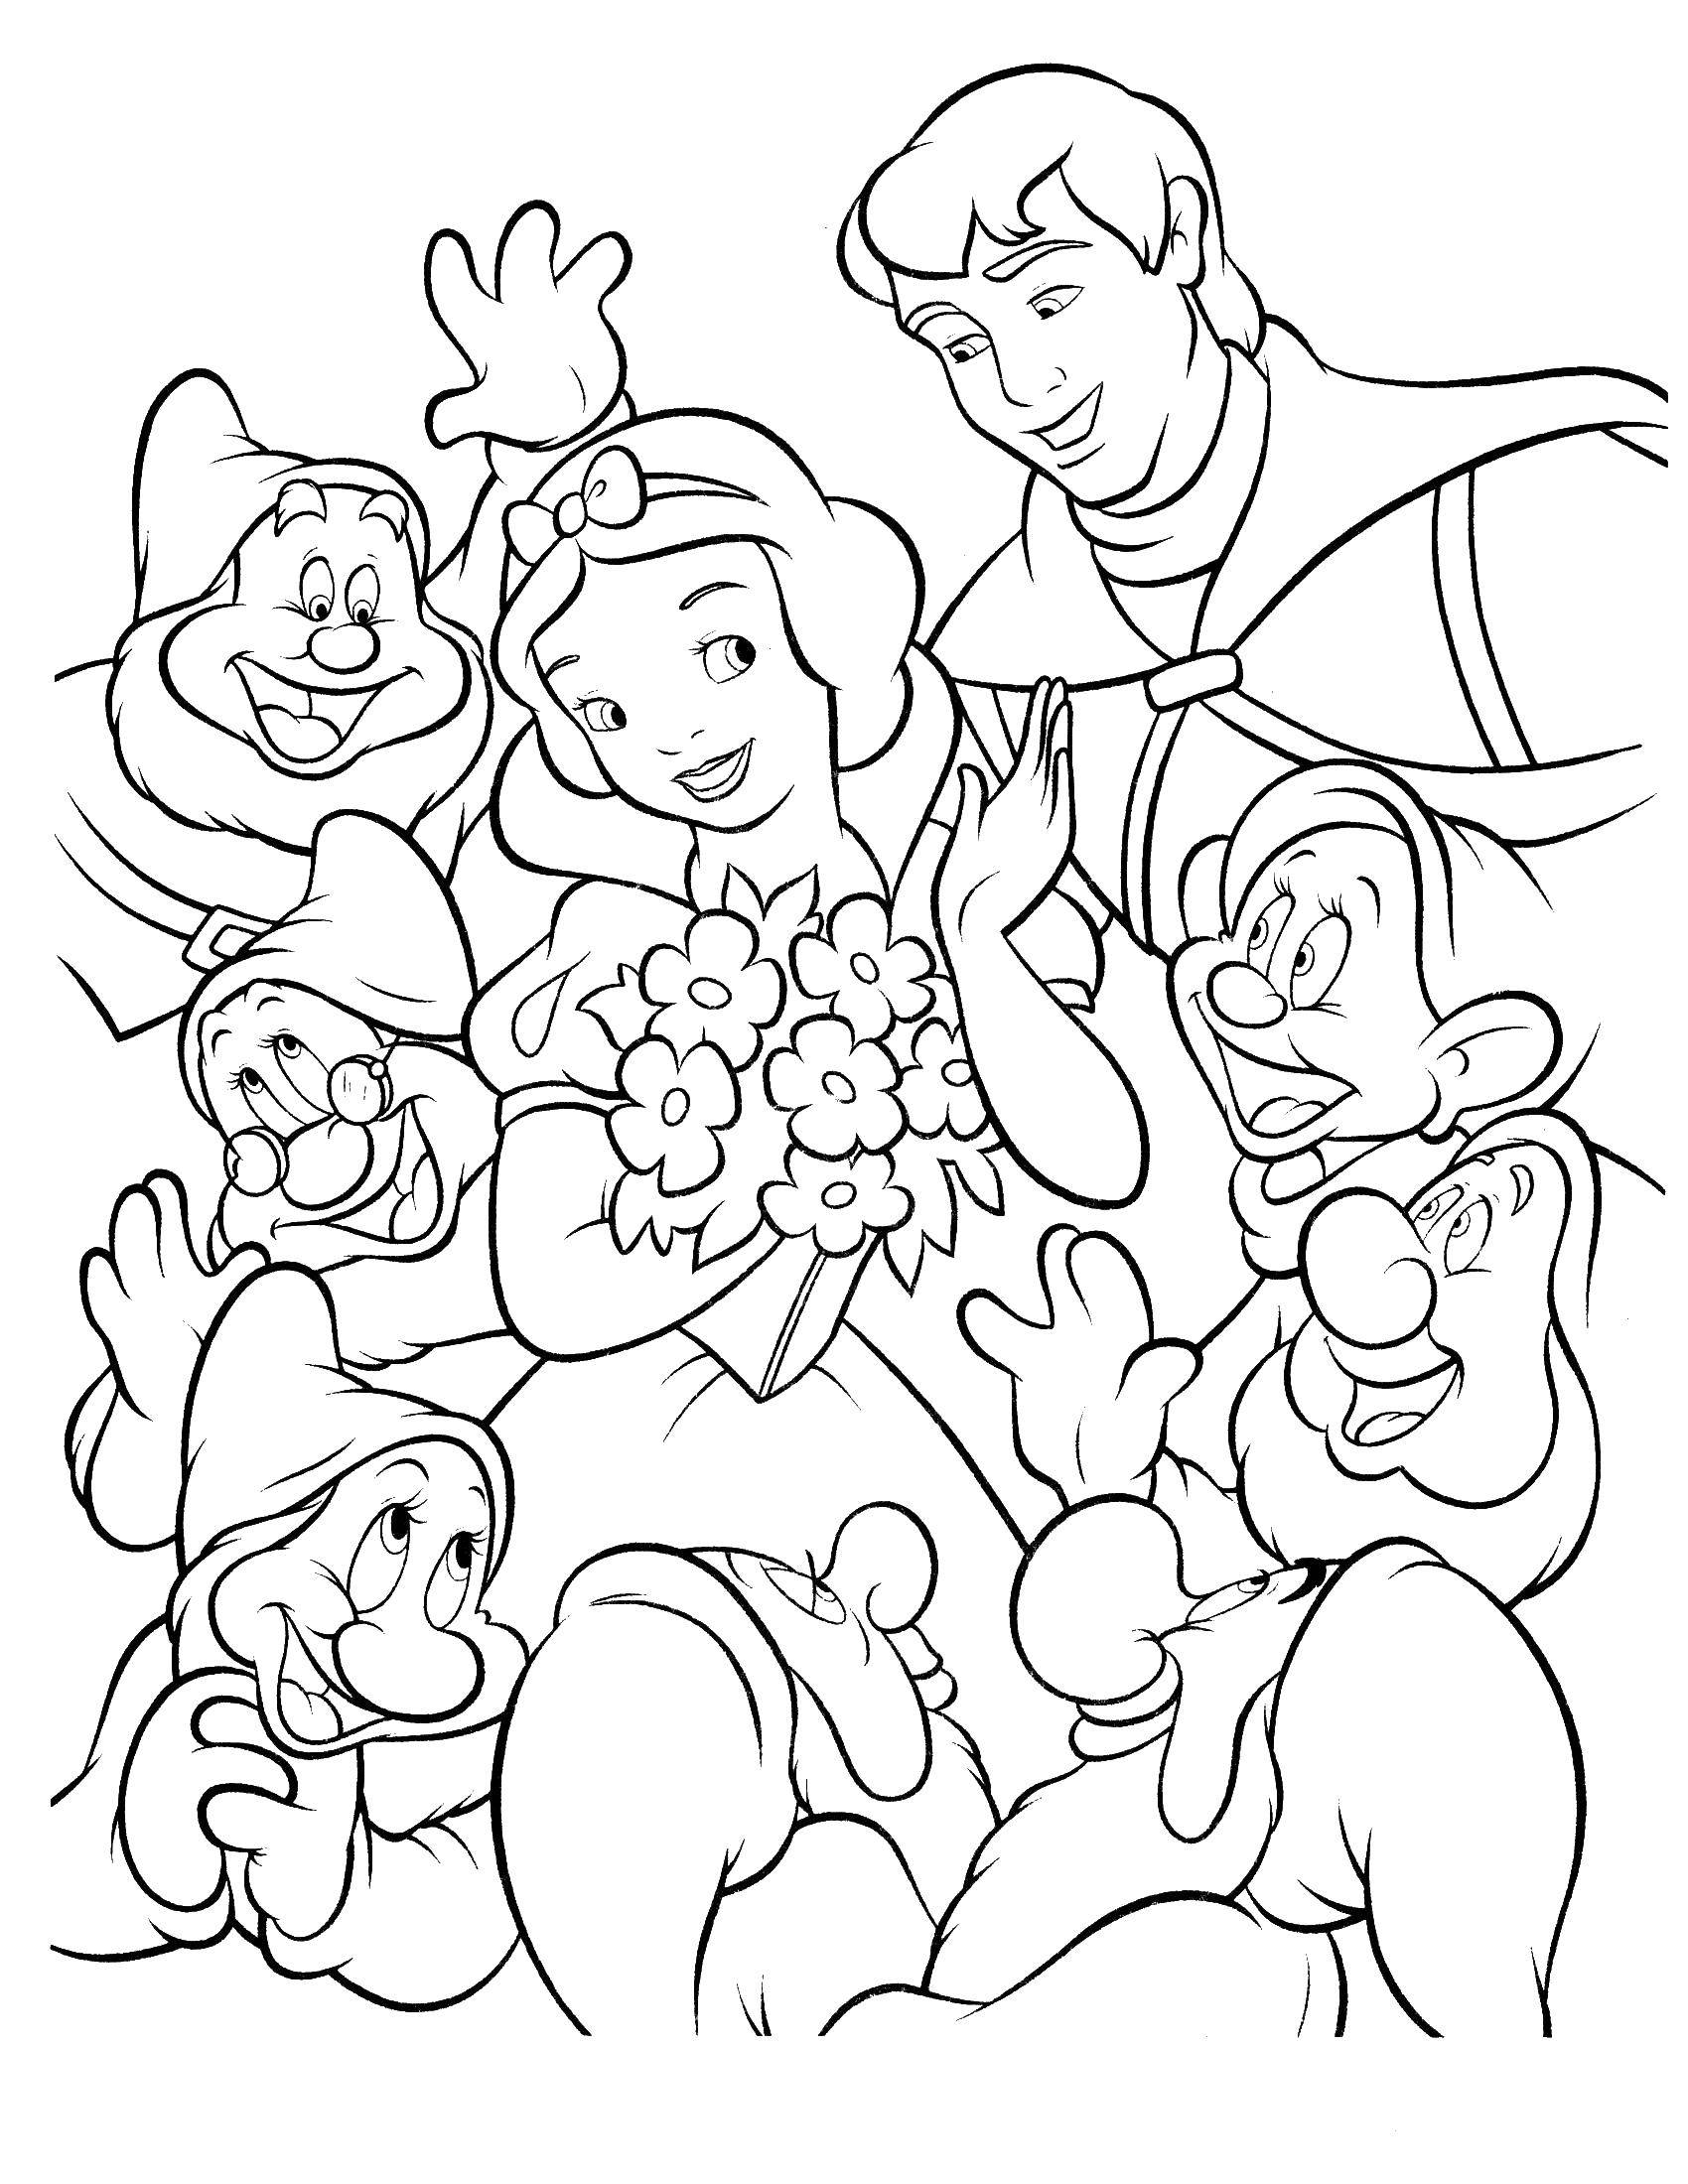 Coloring Snow white with Prince and the 7 dwarfs. Category snow white. Tags:  Disney, Snow white, 7 dwarfs.